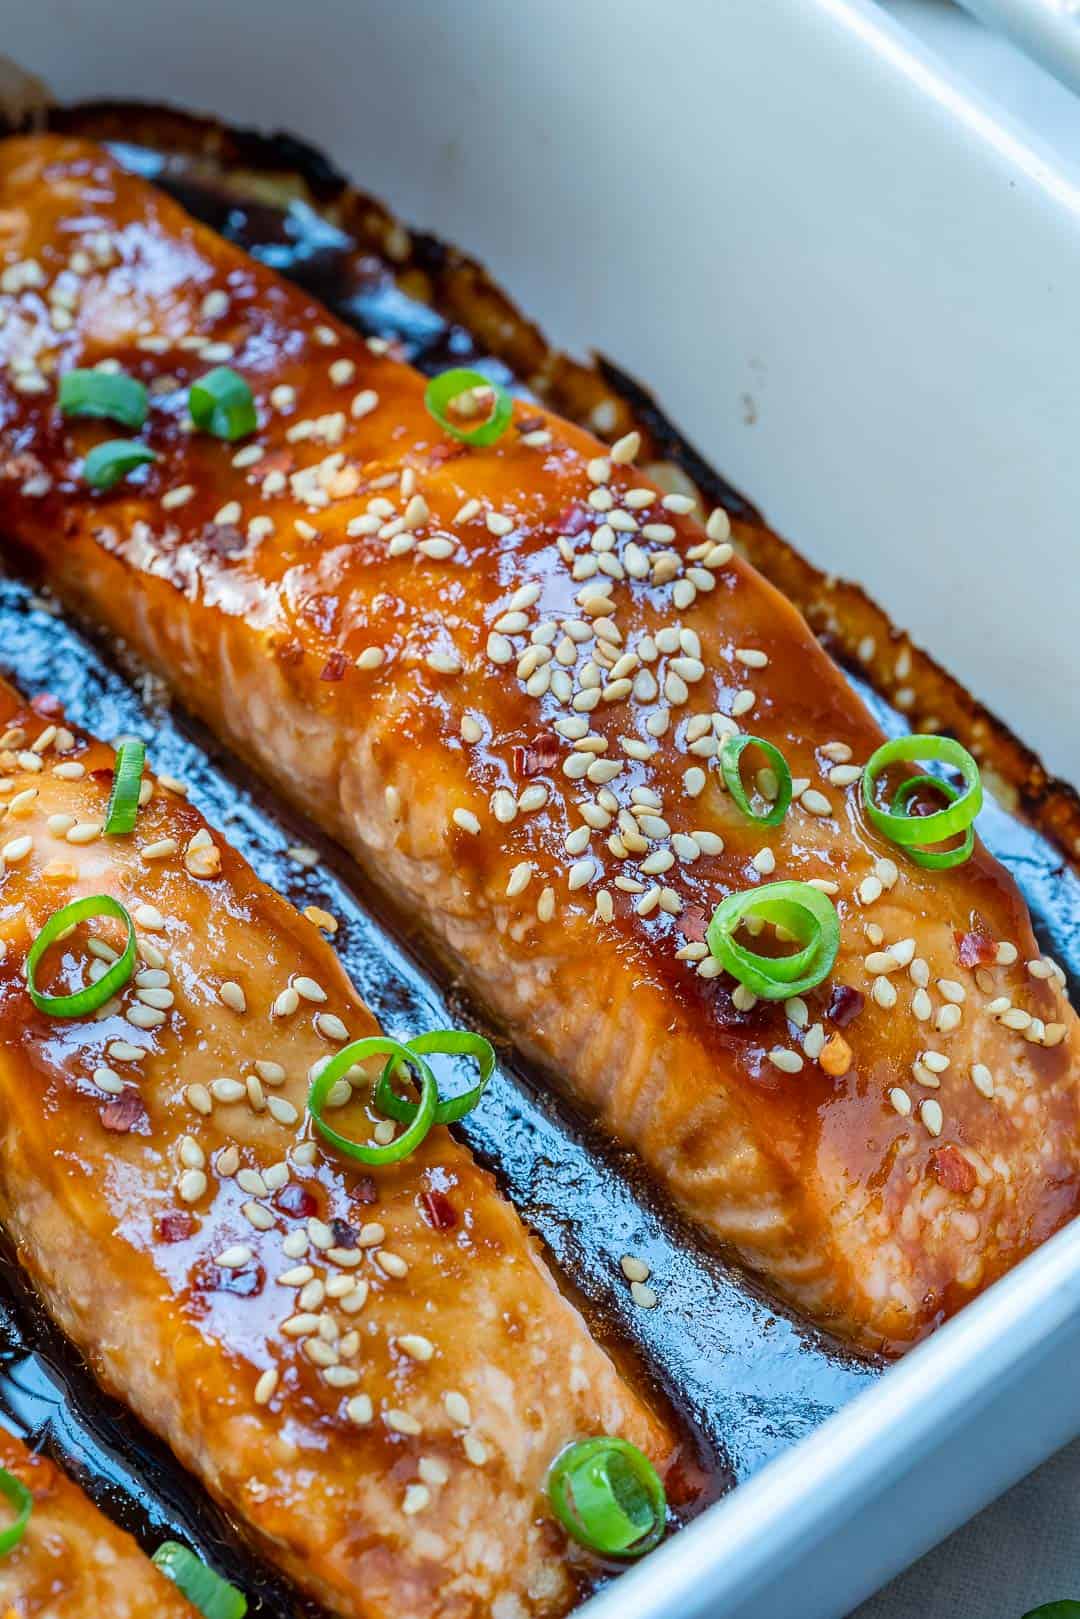 Baked Teriyaki Salmon  via Healthy Fitness Meals. Healthy, easy, and incredibly delicious salmon recipes you'll want to eat over and over again for breakfast,  lunch, or dinner! Find baked salmon, grilled salmon, smoked, pan-seared, and more!